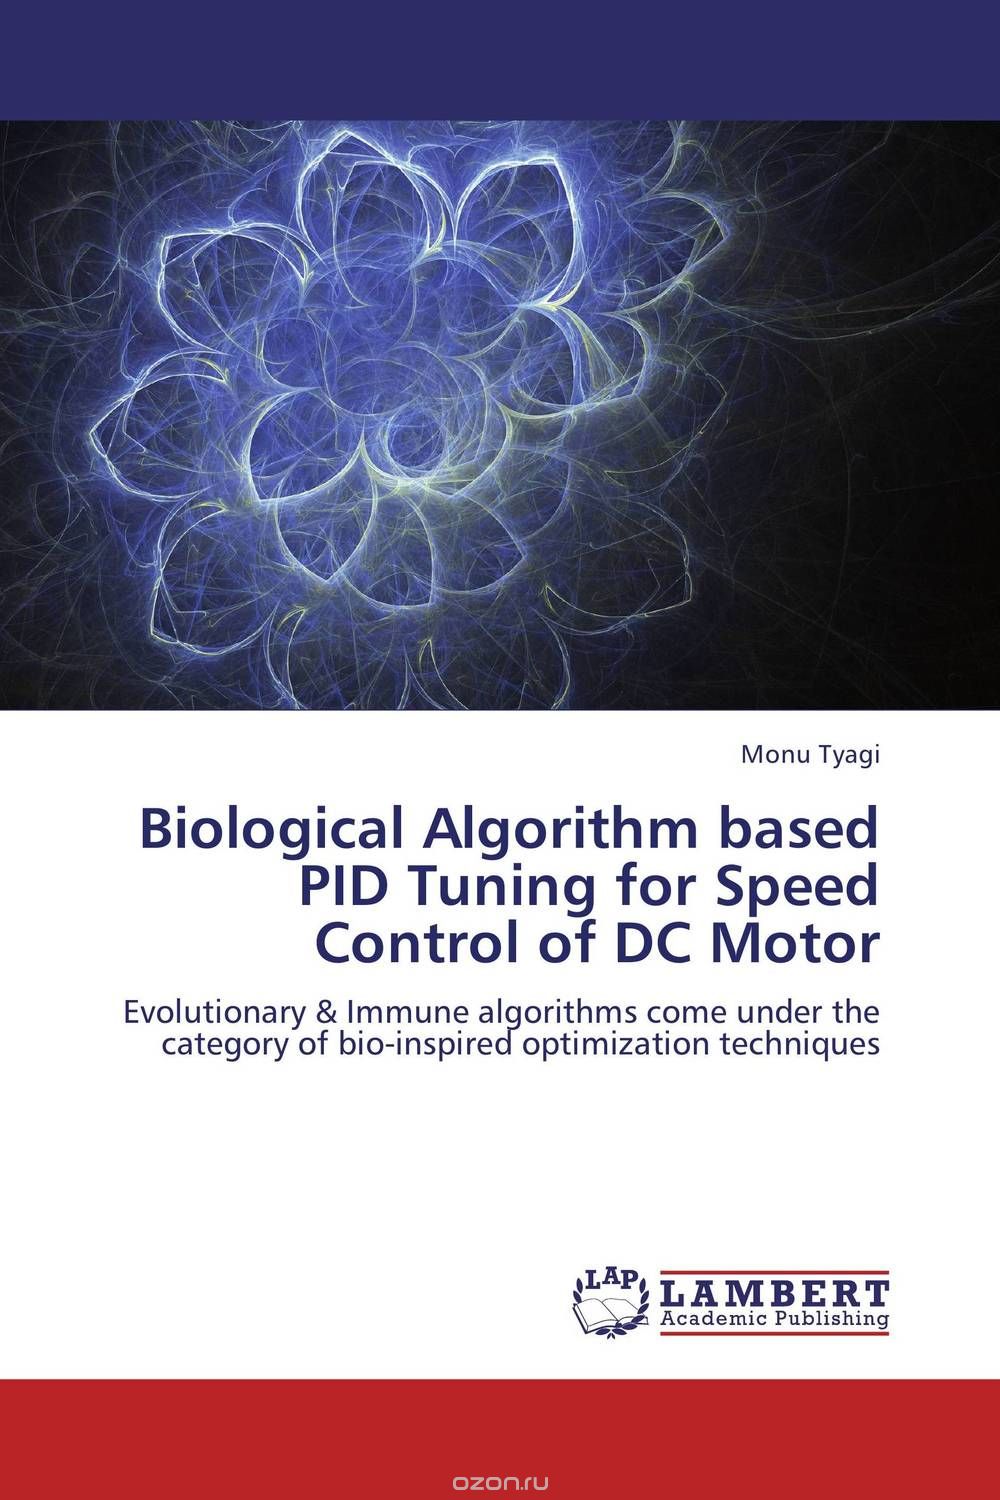 Biological Algorithm based PID Tuning for Speed Control of DC Motor